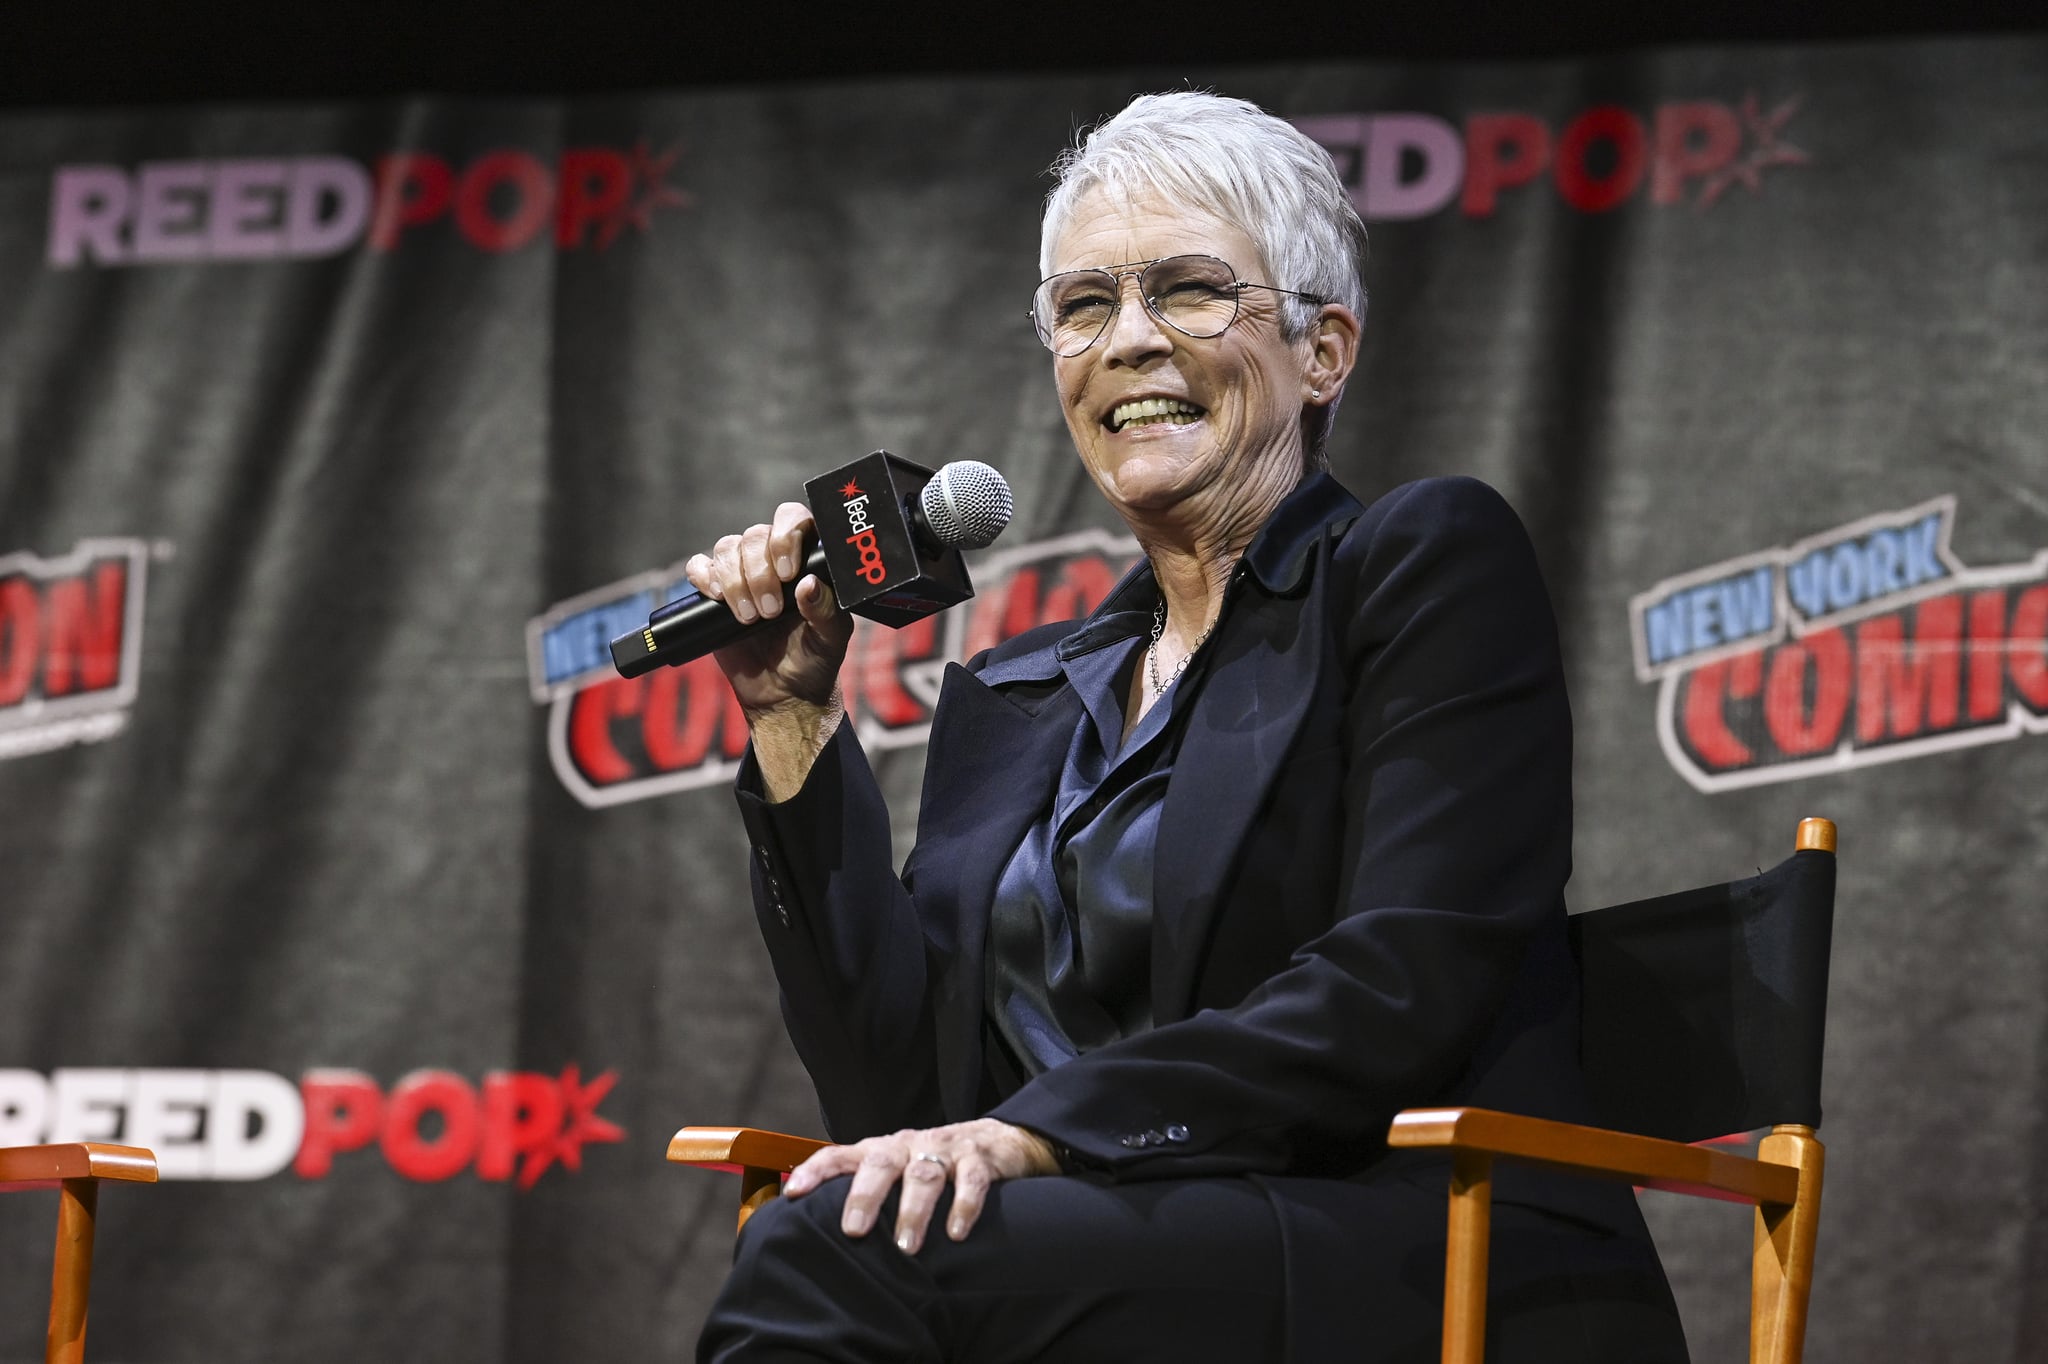 NEW YORK, NEW YORK - OCTOBER 08:  Jamie Lee Curtis speaks onstage during HALLOWEEN ENDS presented by Universal Pictures during New York Comic Con at Jacob Javits Center on October 08, 2022 in New York City. (Photo by Slaven Vlasic/Getty Images for Universal Pictures)